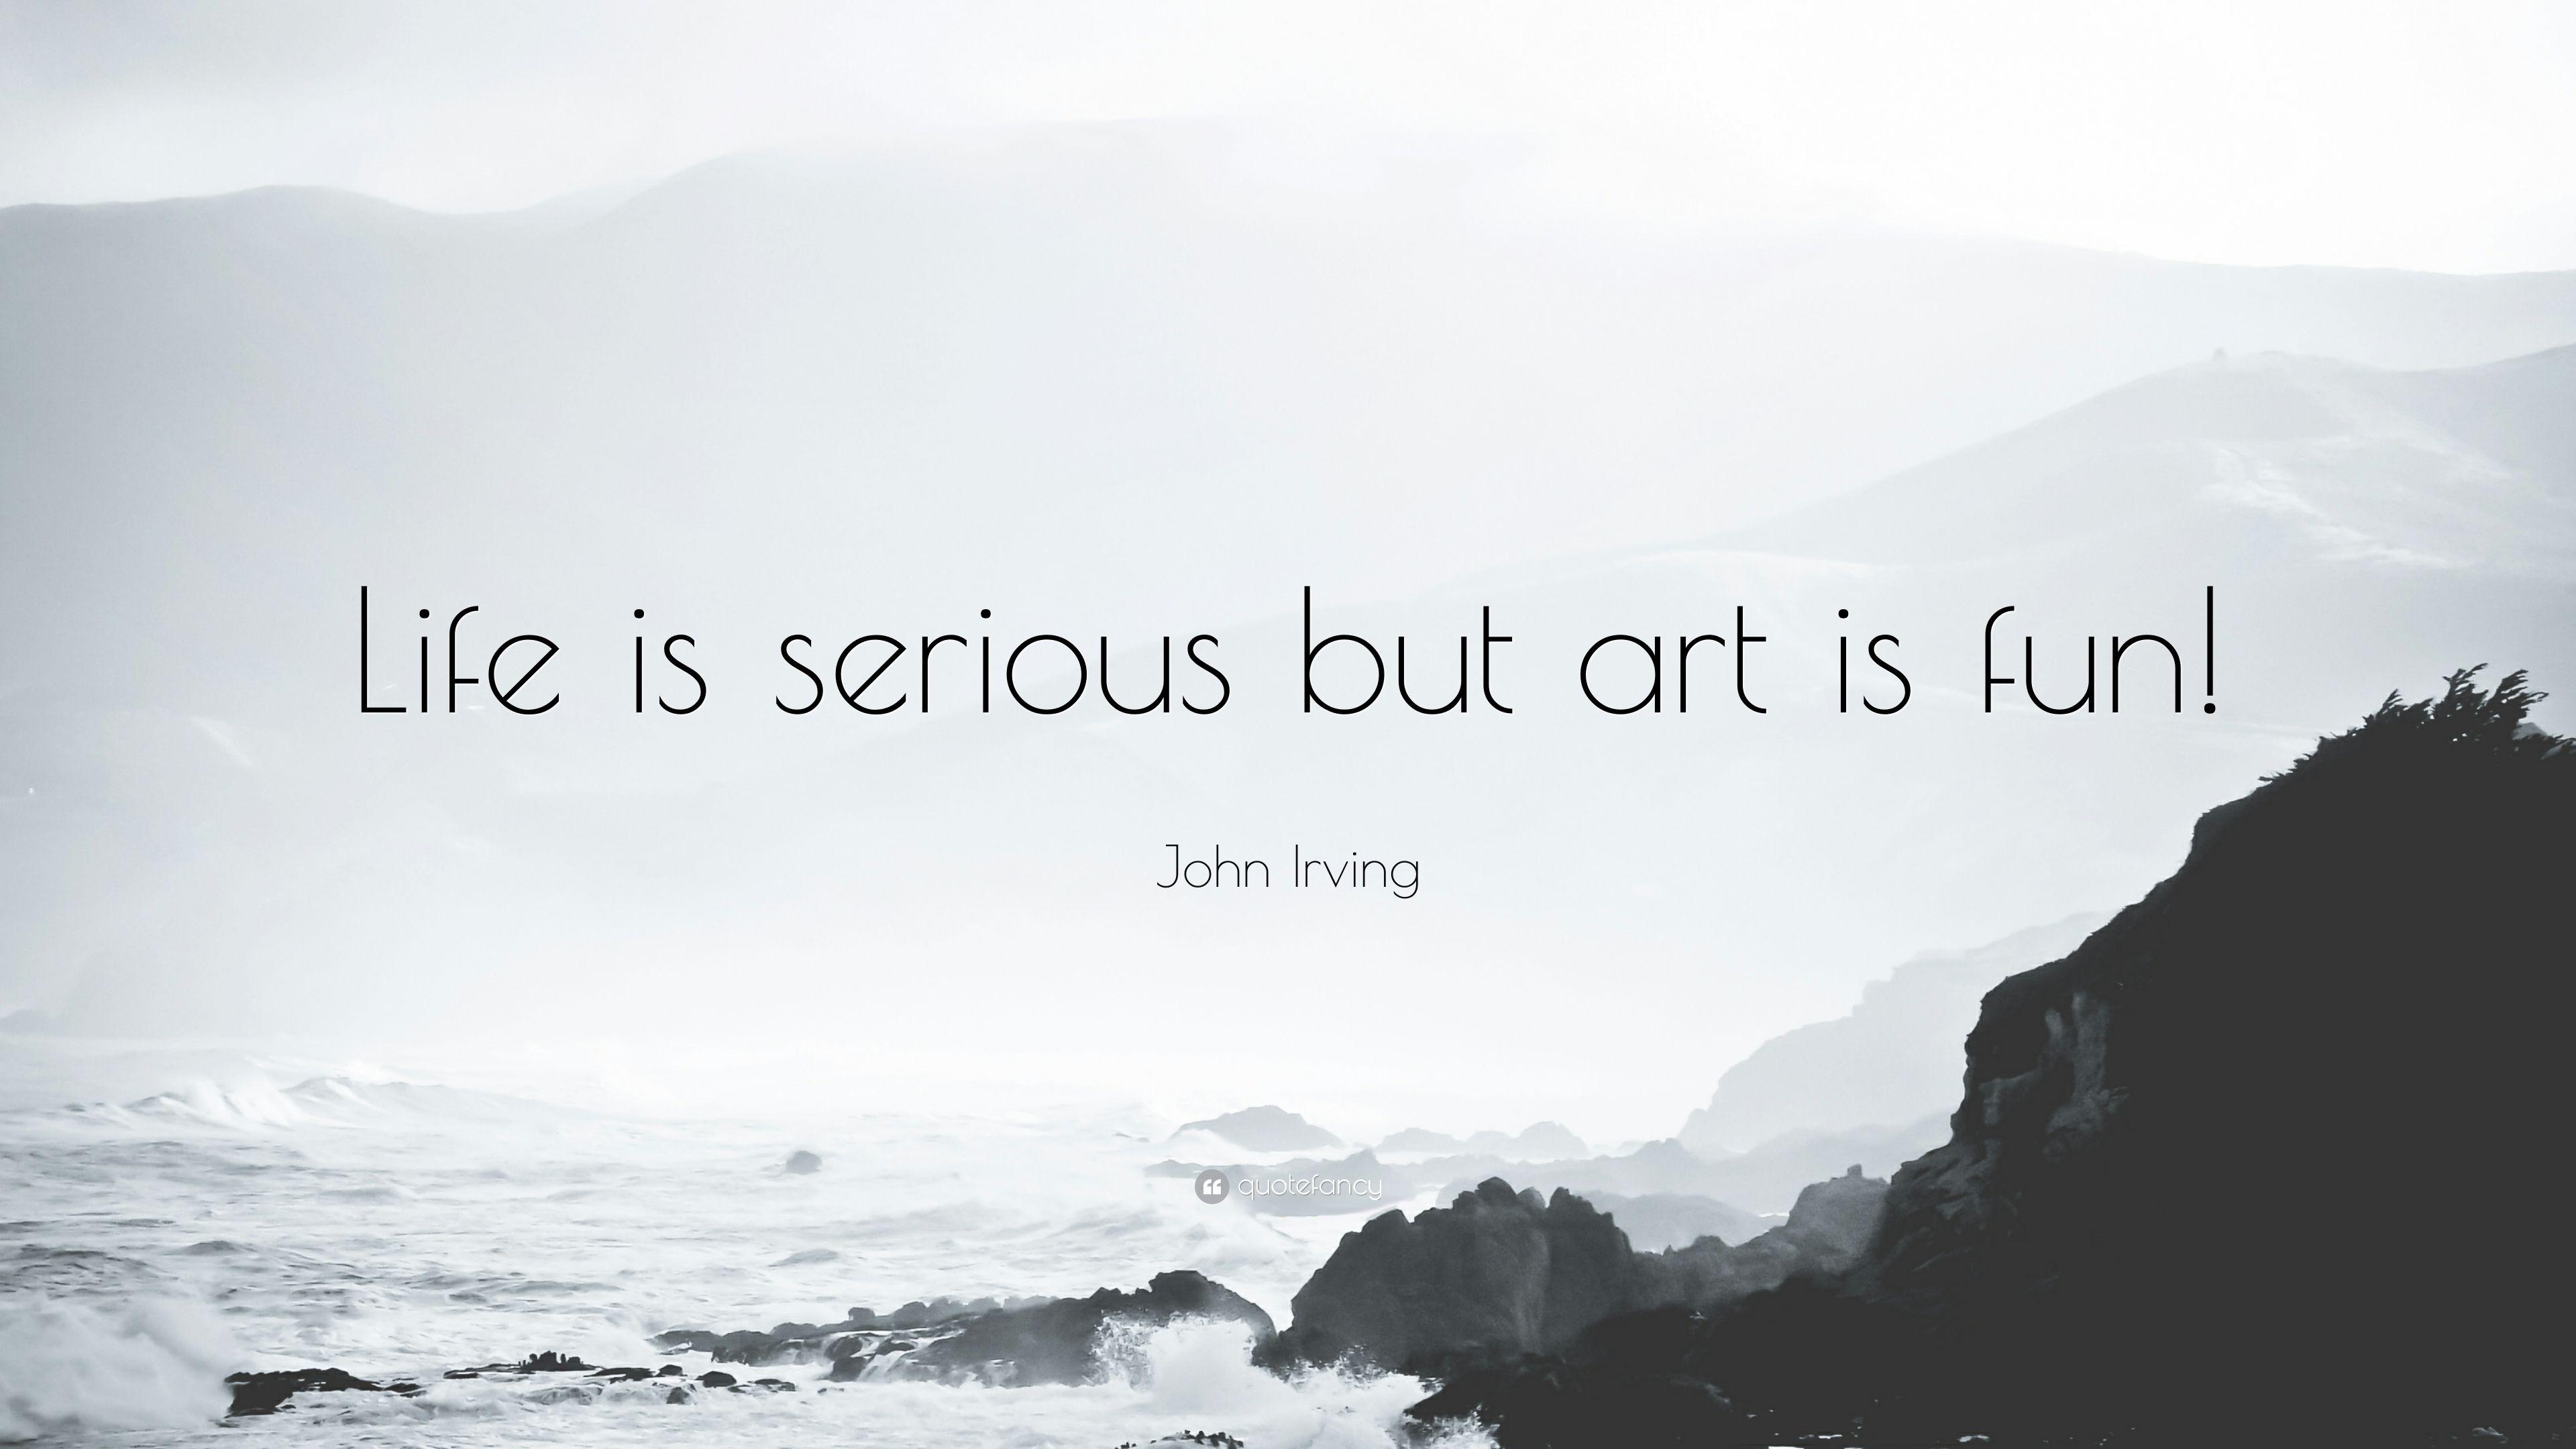 John Irving Quote: “Life is serious but art is fun!” 6